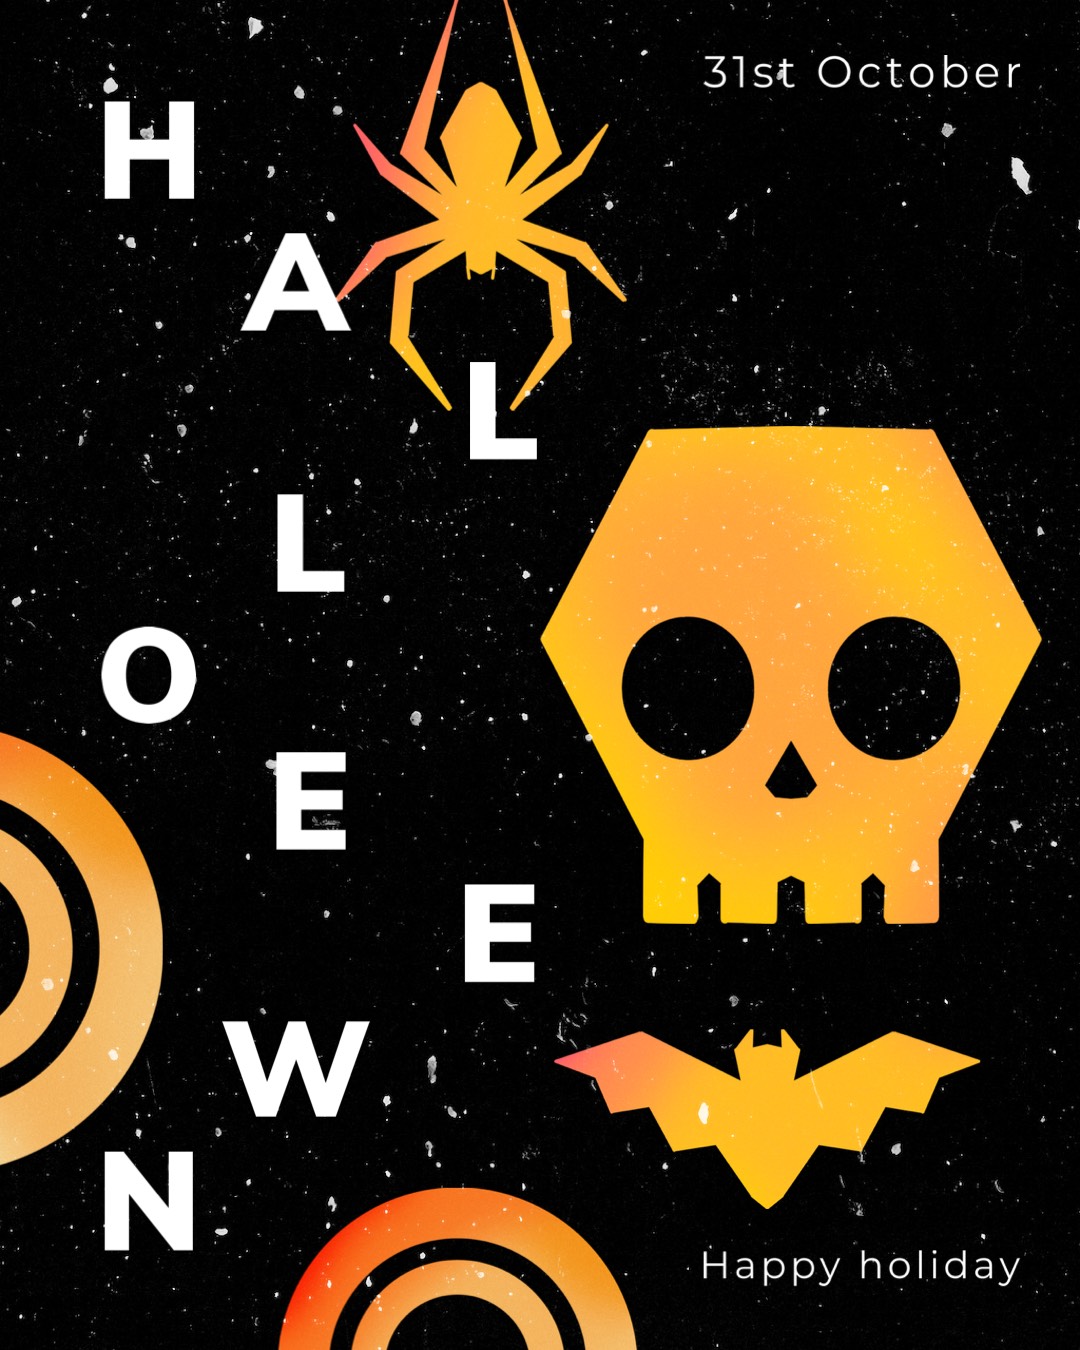 A Halloween Poster With A Skull And A Spider Halloween Template